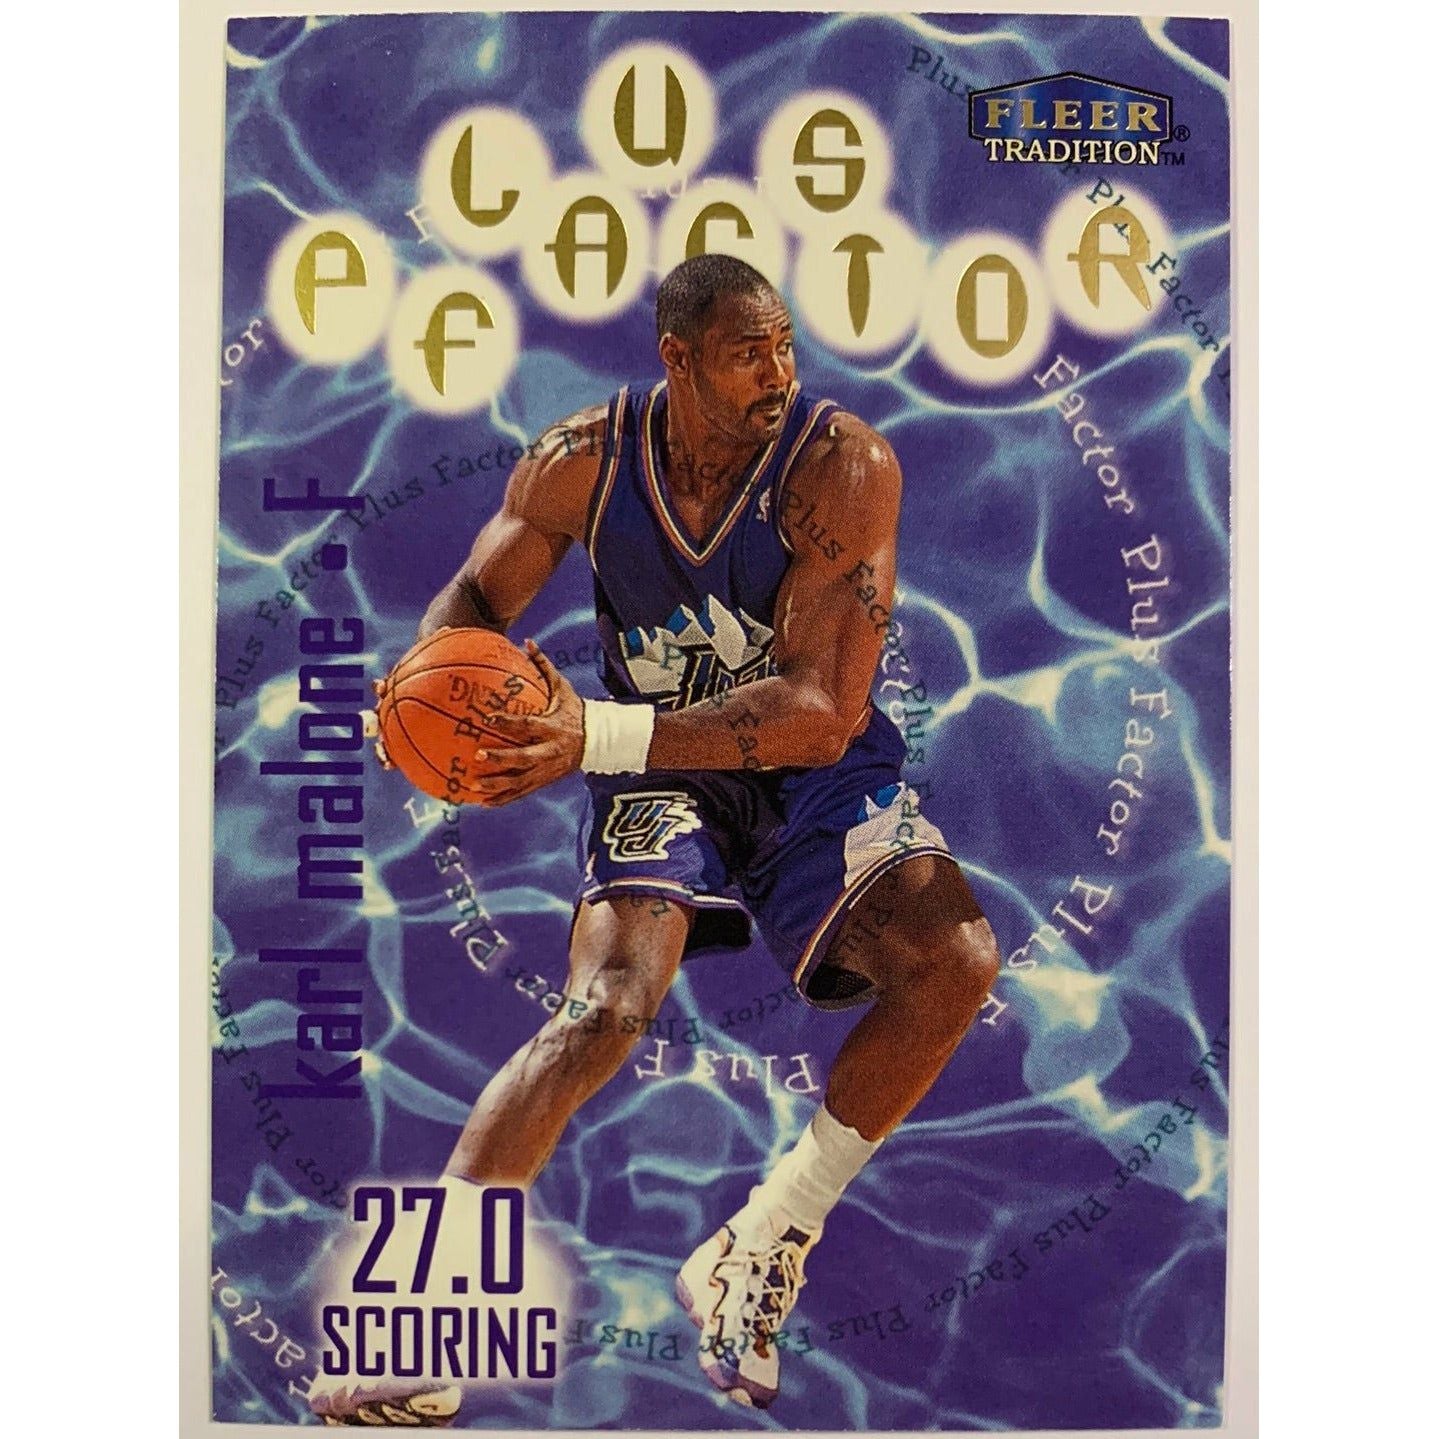  1998-99 Fleer Tradition Karl Malone Plus Factor  Local Legends Cards & Collectibles